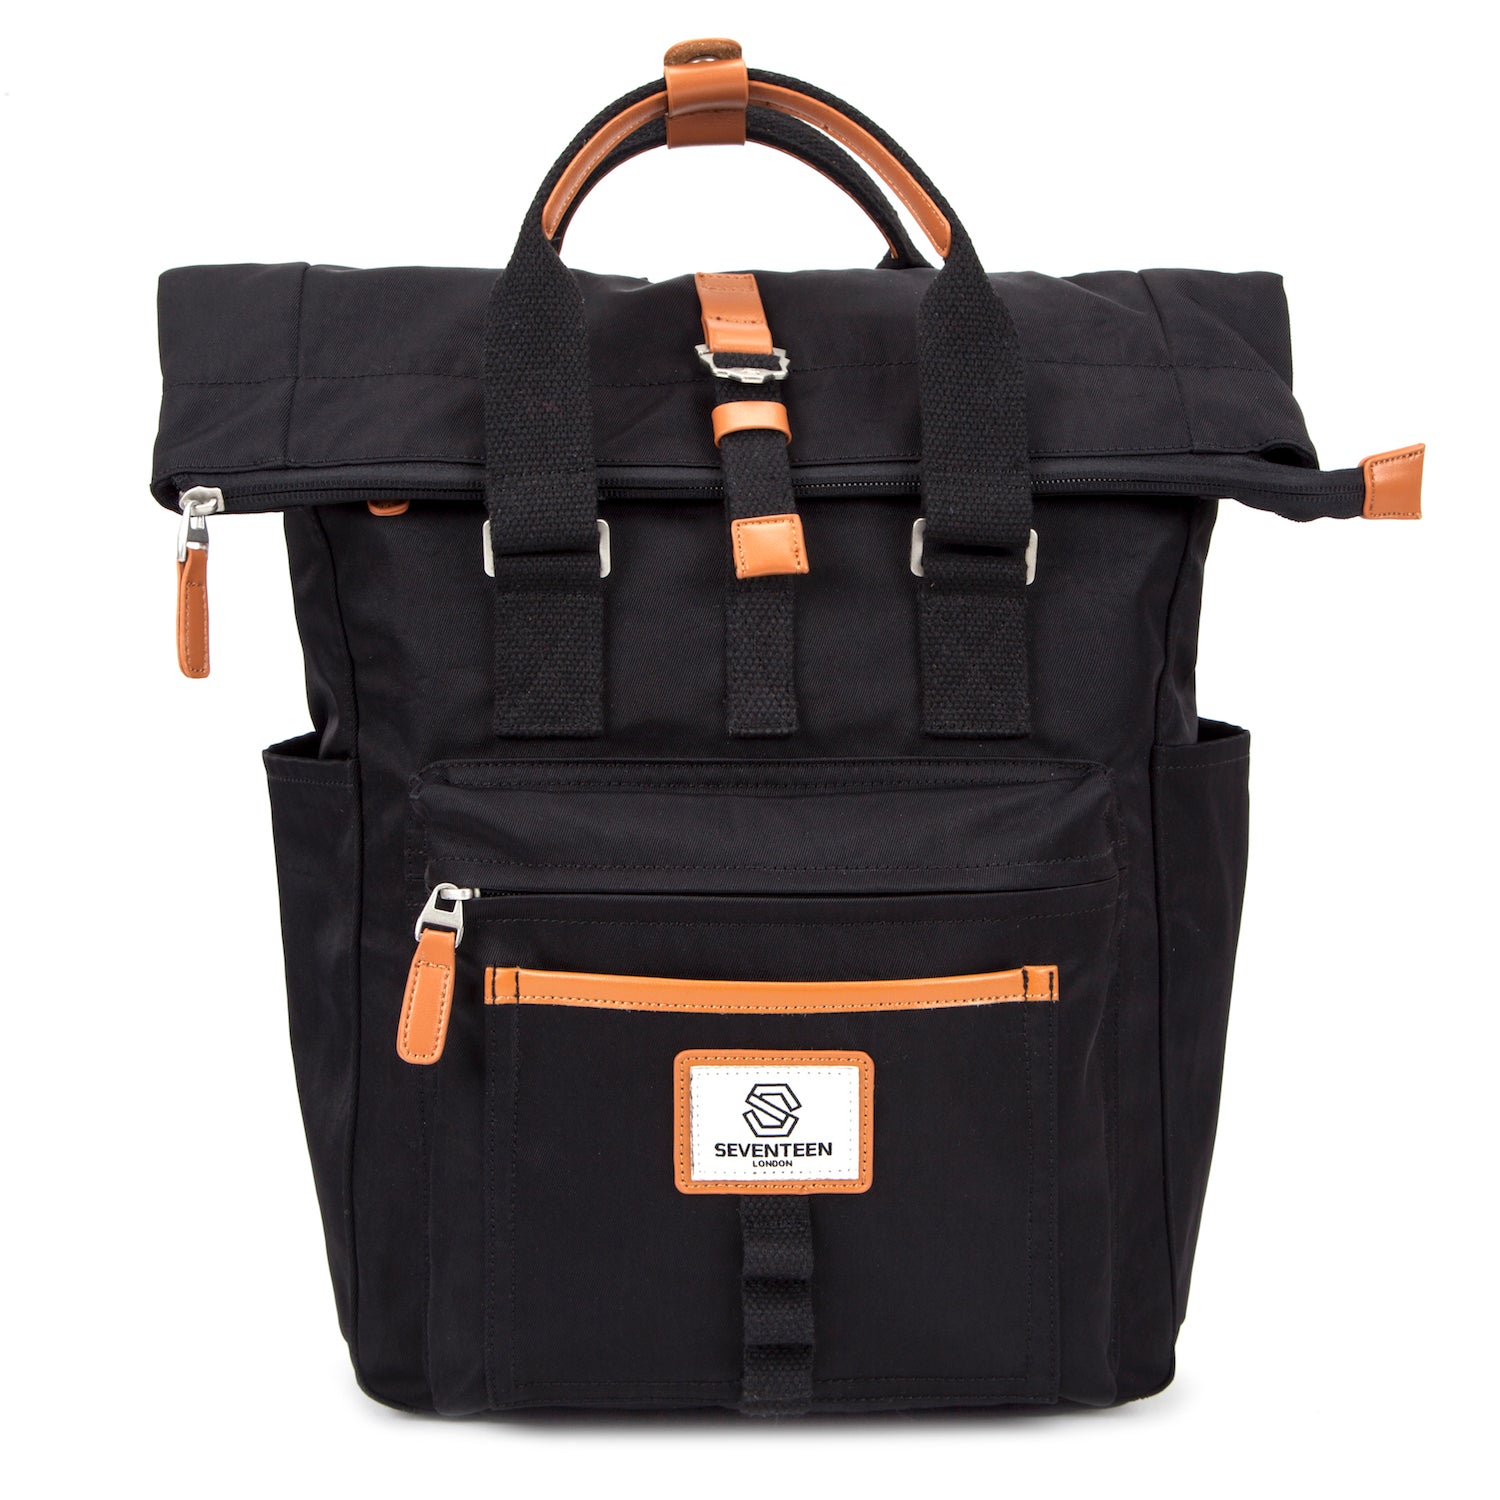 Canary Wharf Backpack - Black with Tan